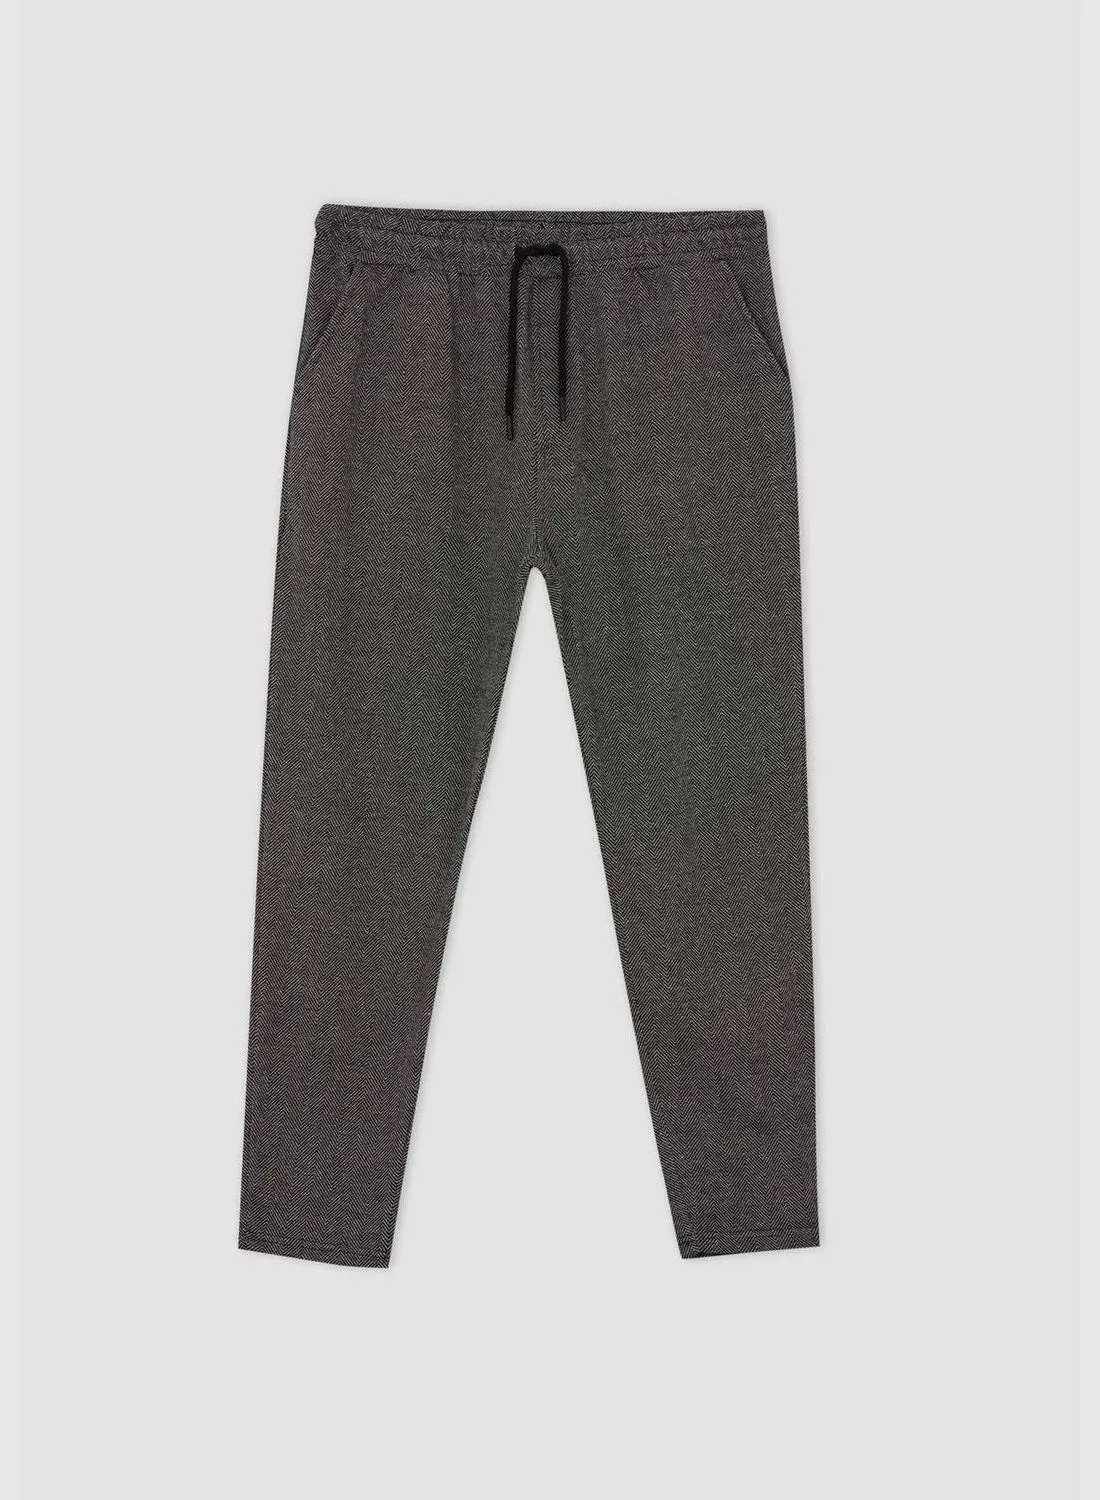 DeFacto Man Knitted Trousers